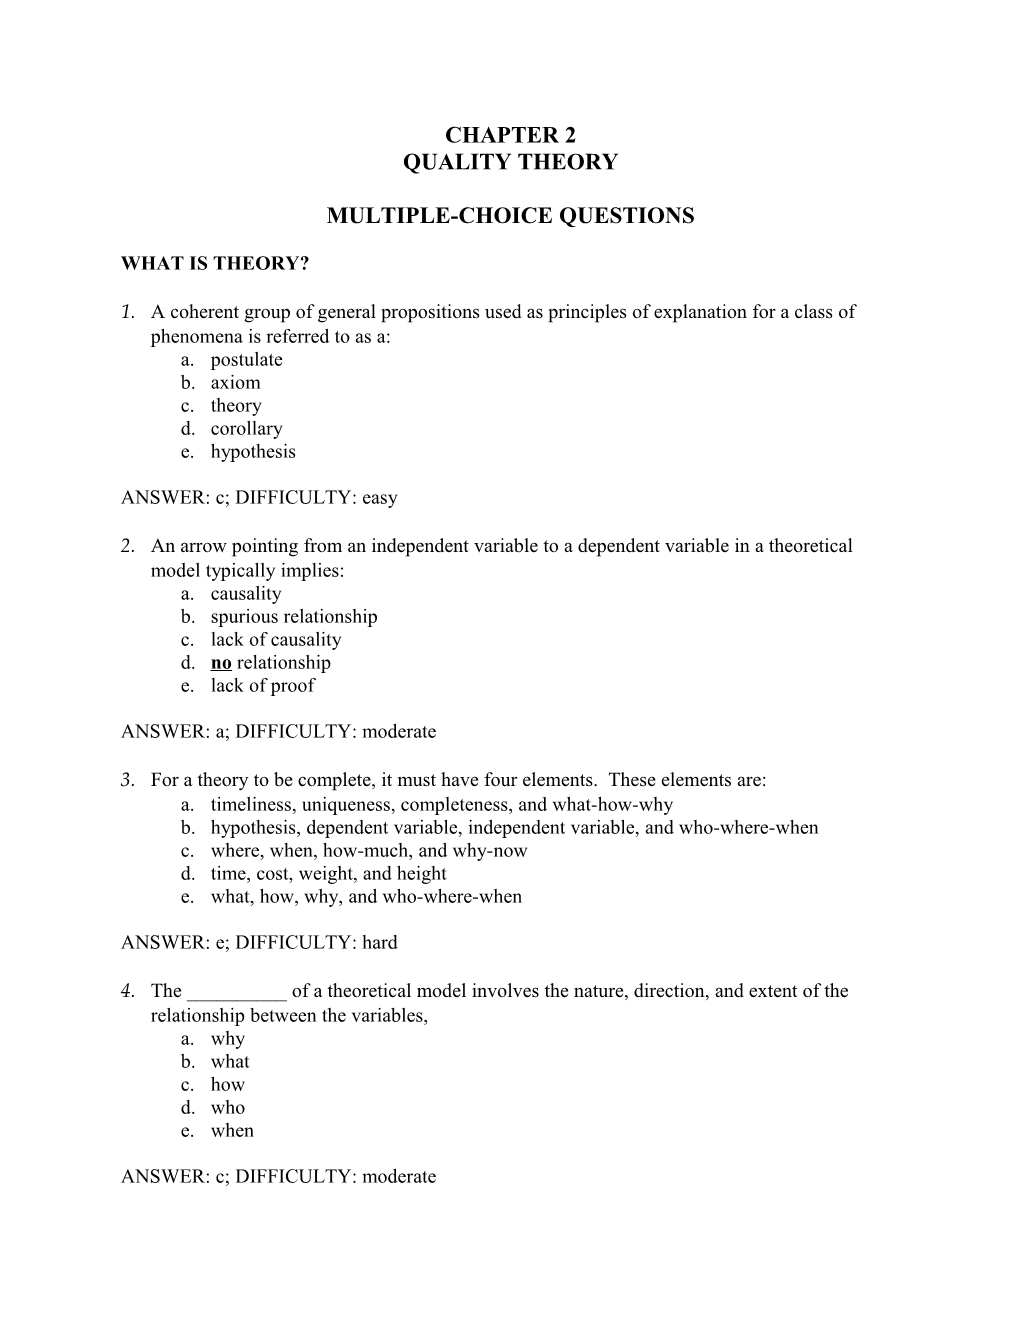 Multiple-Choice Questions s16